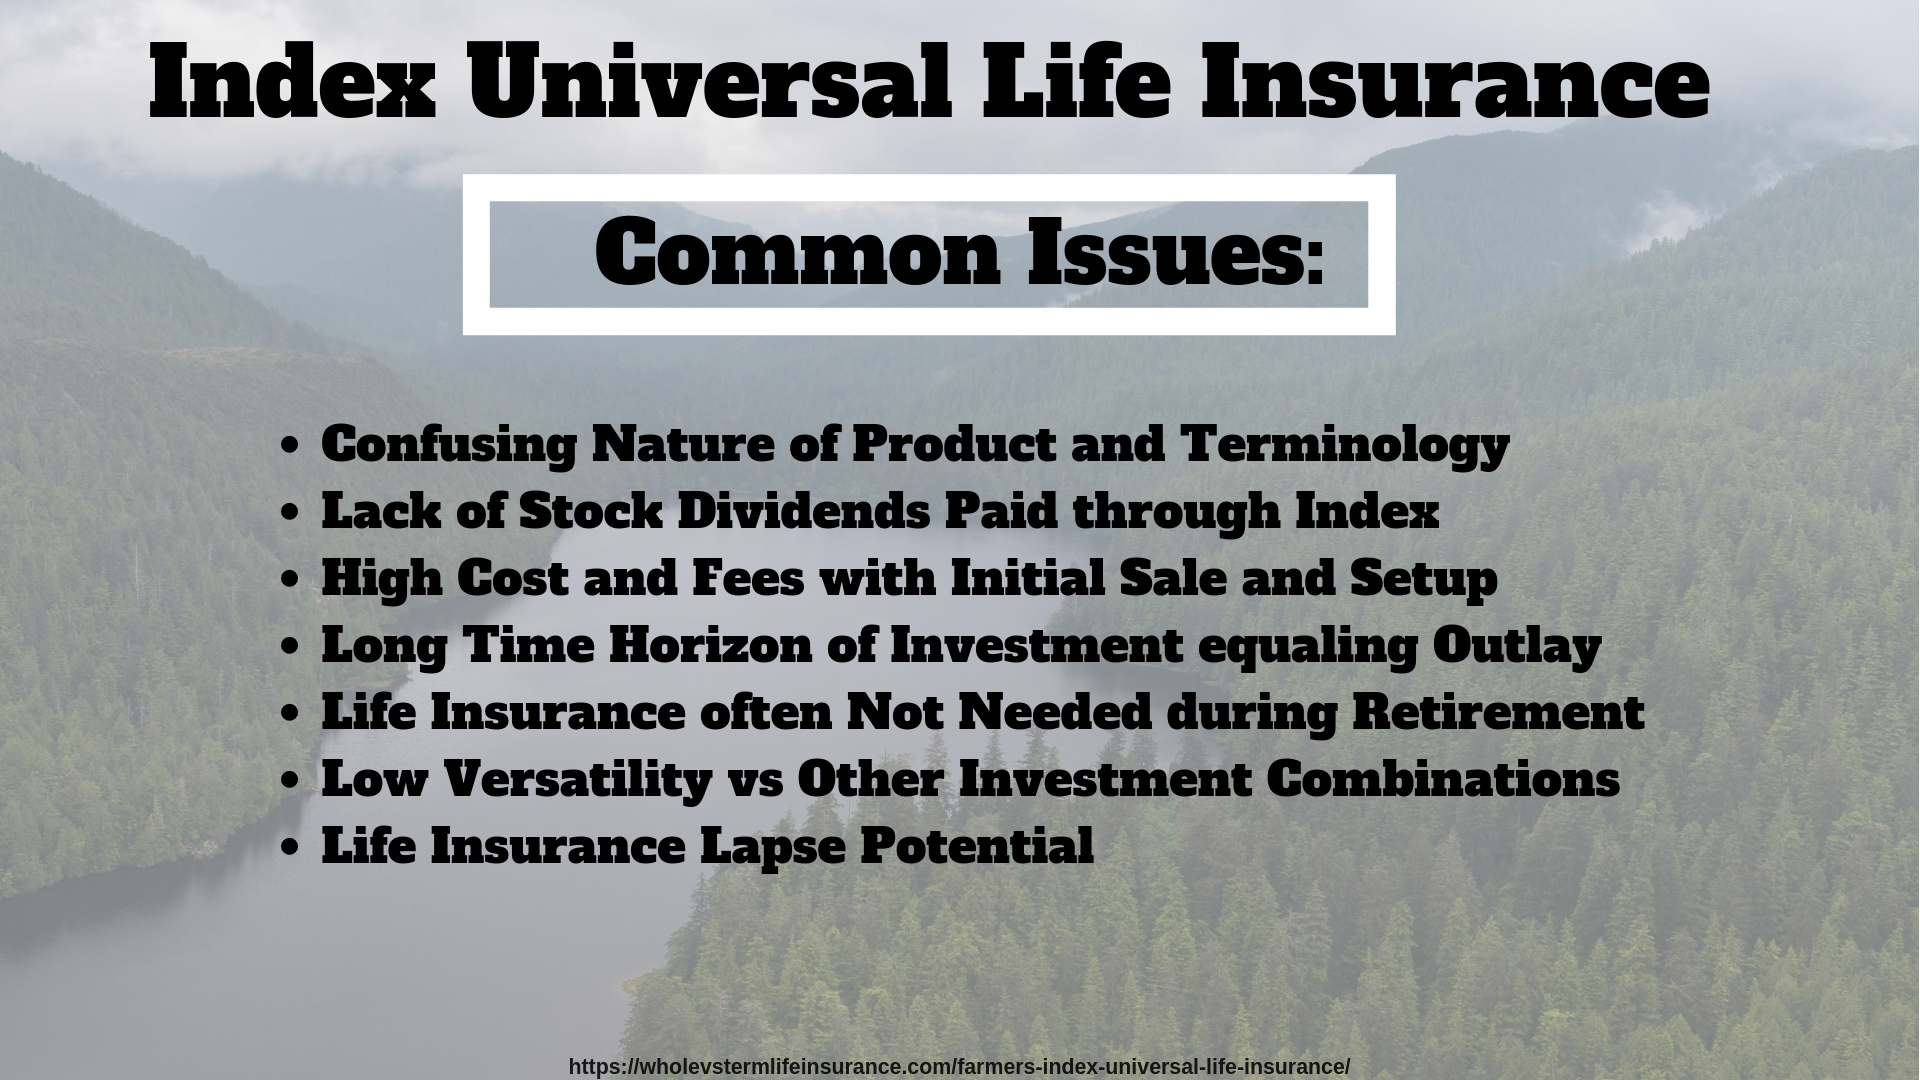 Common Issues Most IUL policies have, not just the Farmers Policy